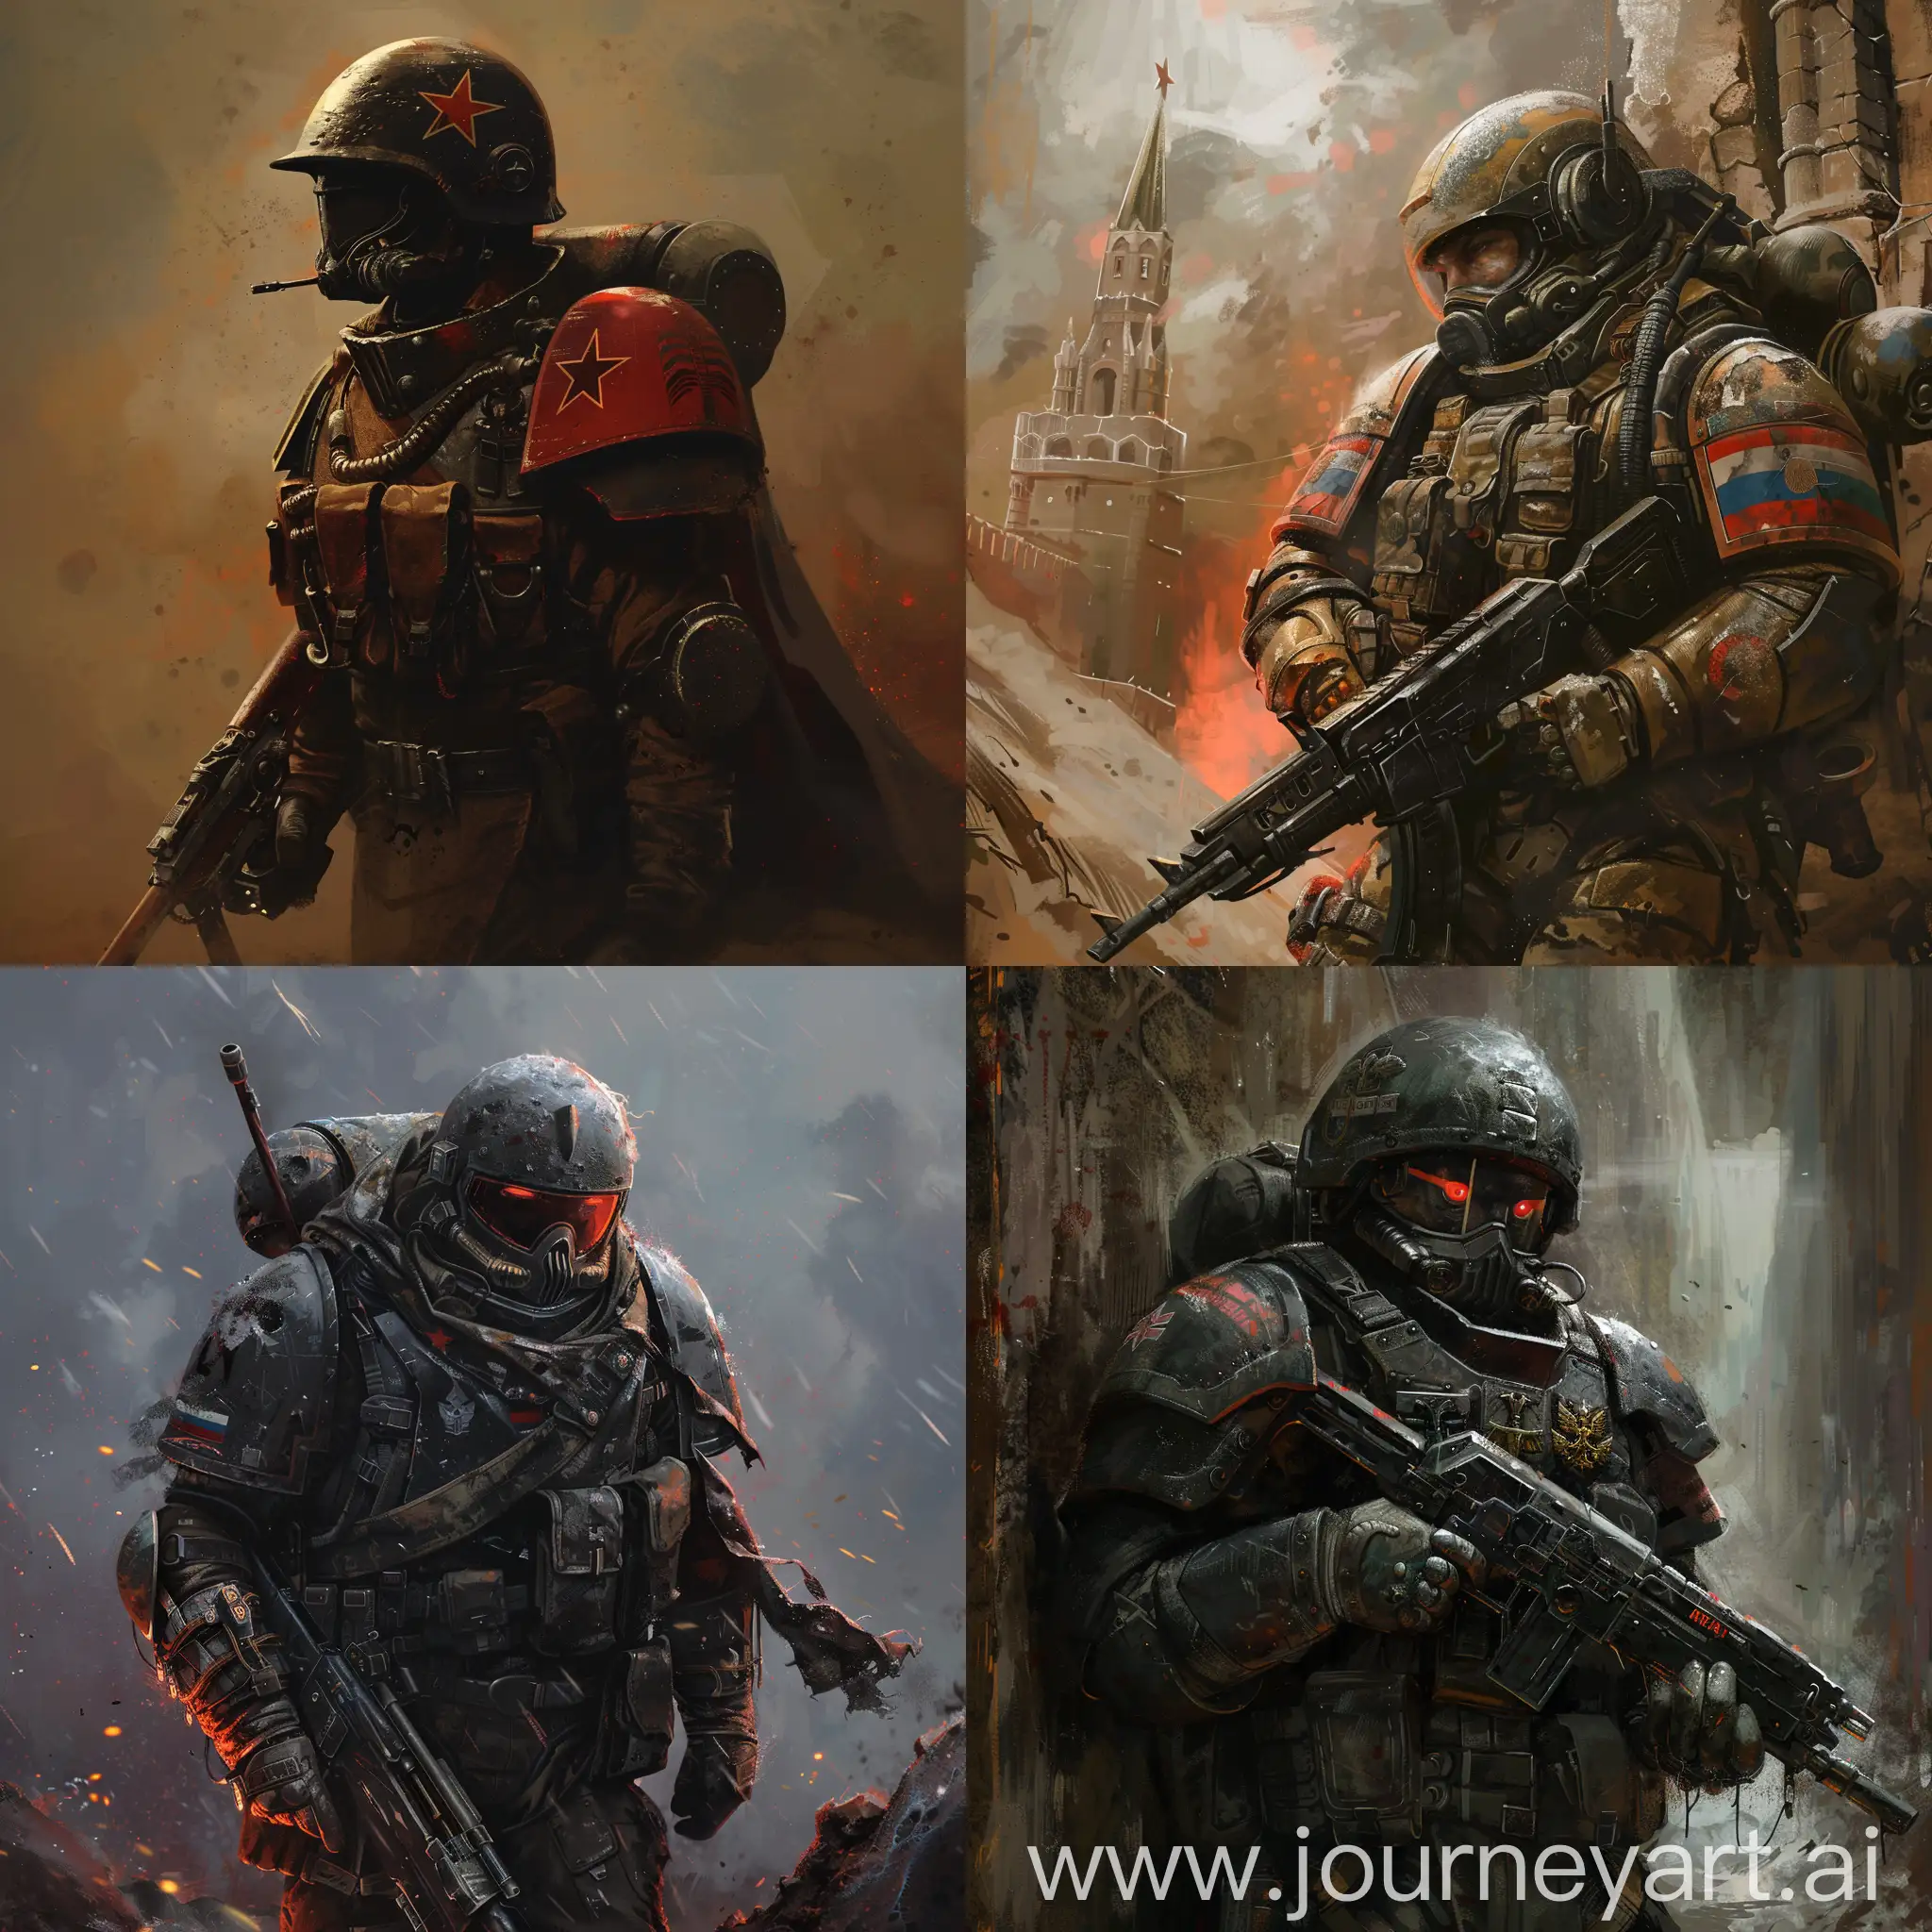 Russian-Soldier-in-the-Grim-Darkness-of-the-Far-Future-Warhammer-40k-Style-Artwork